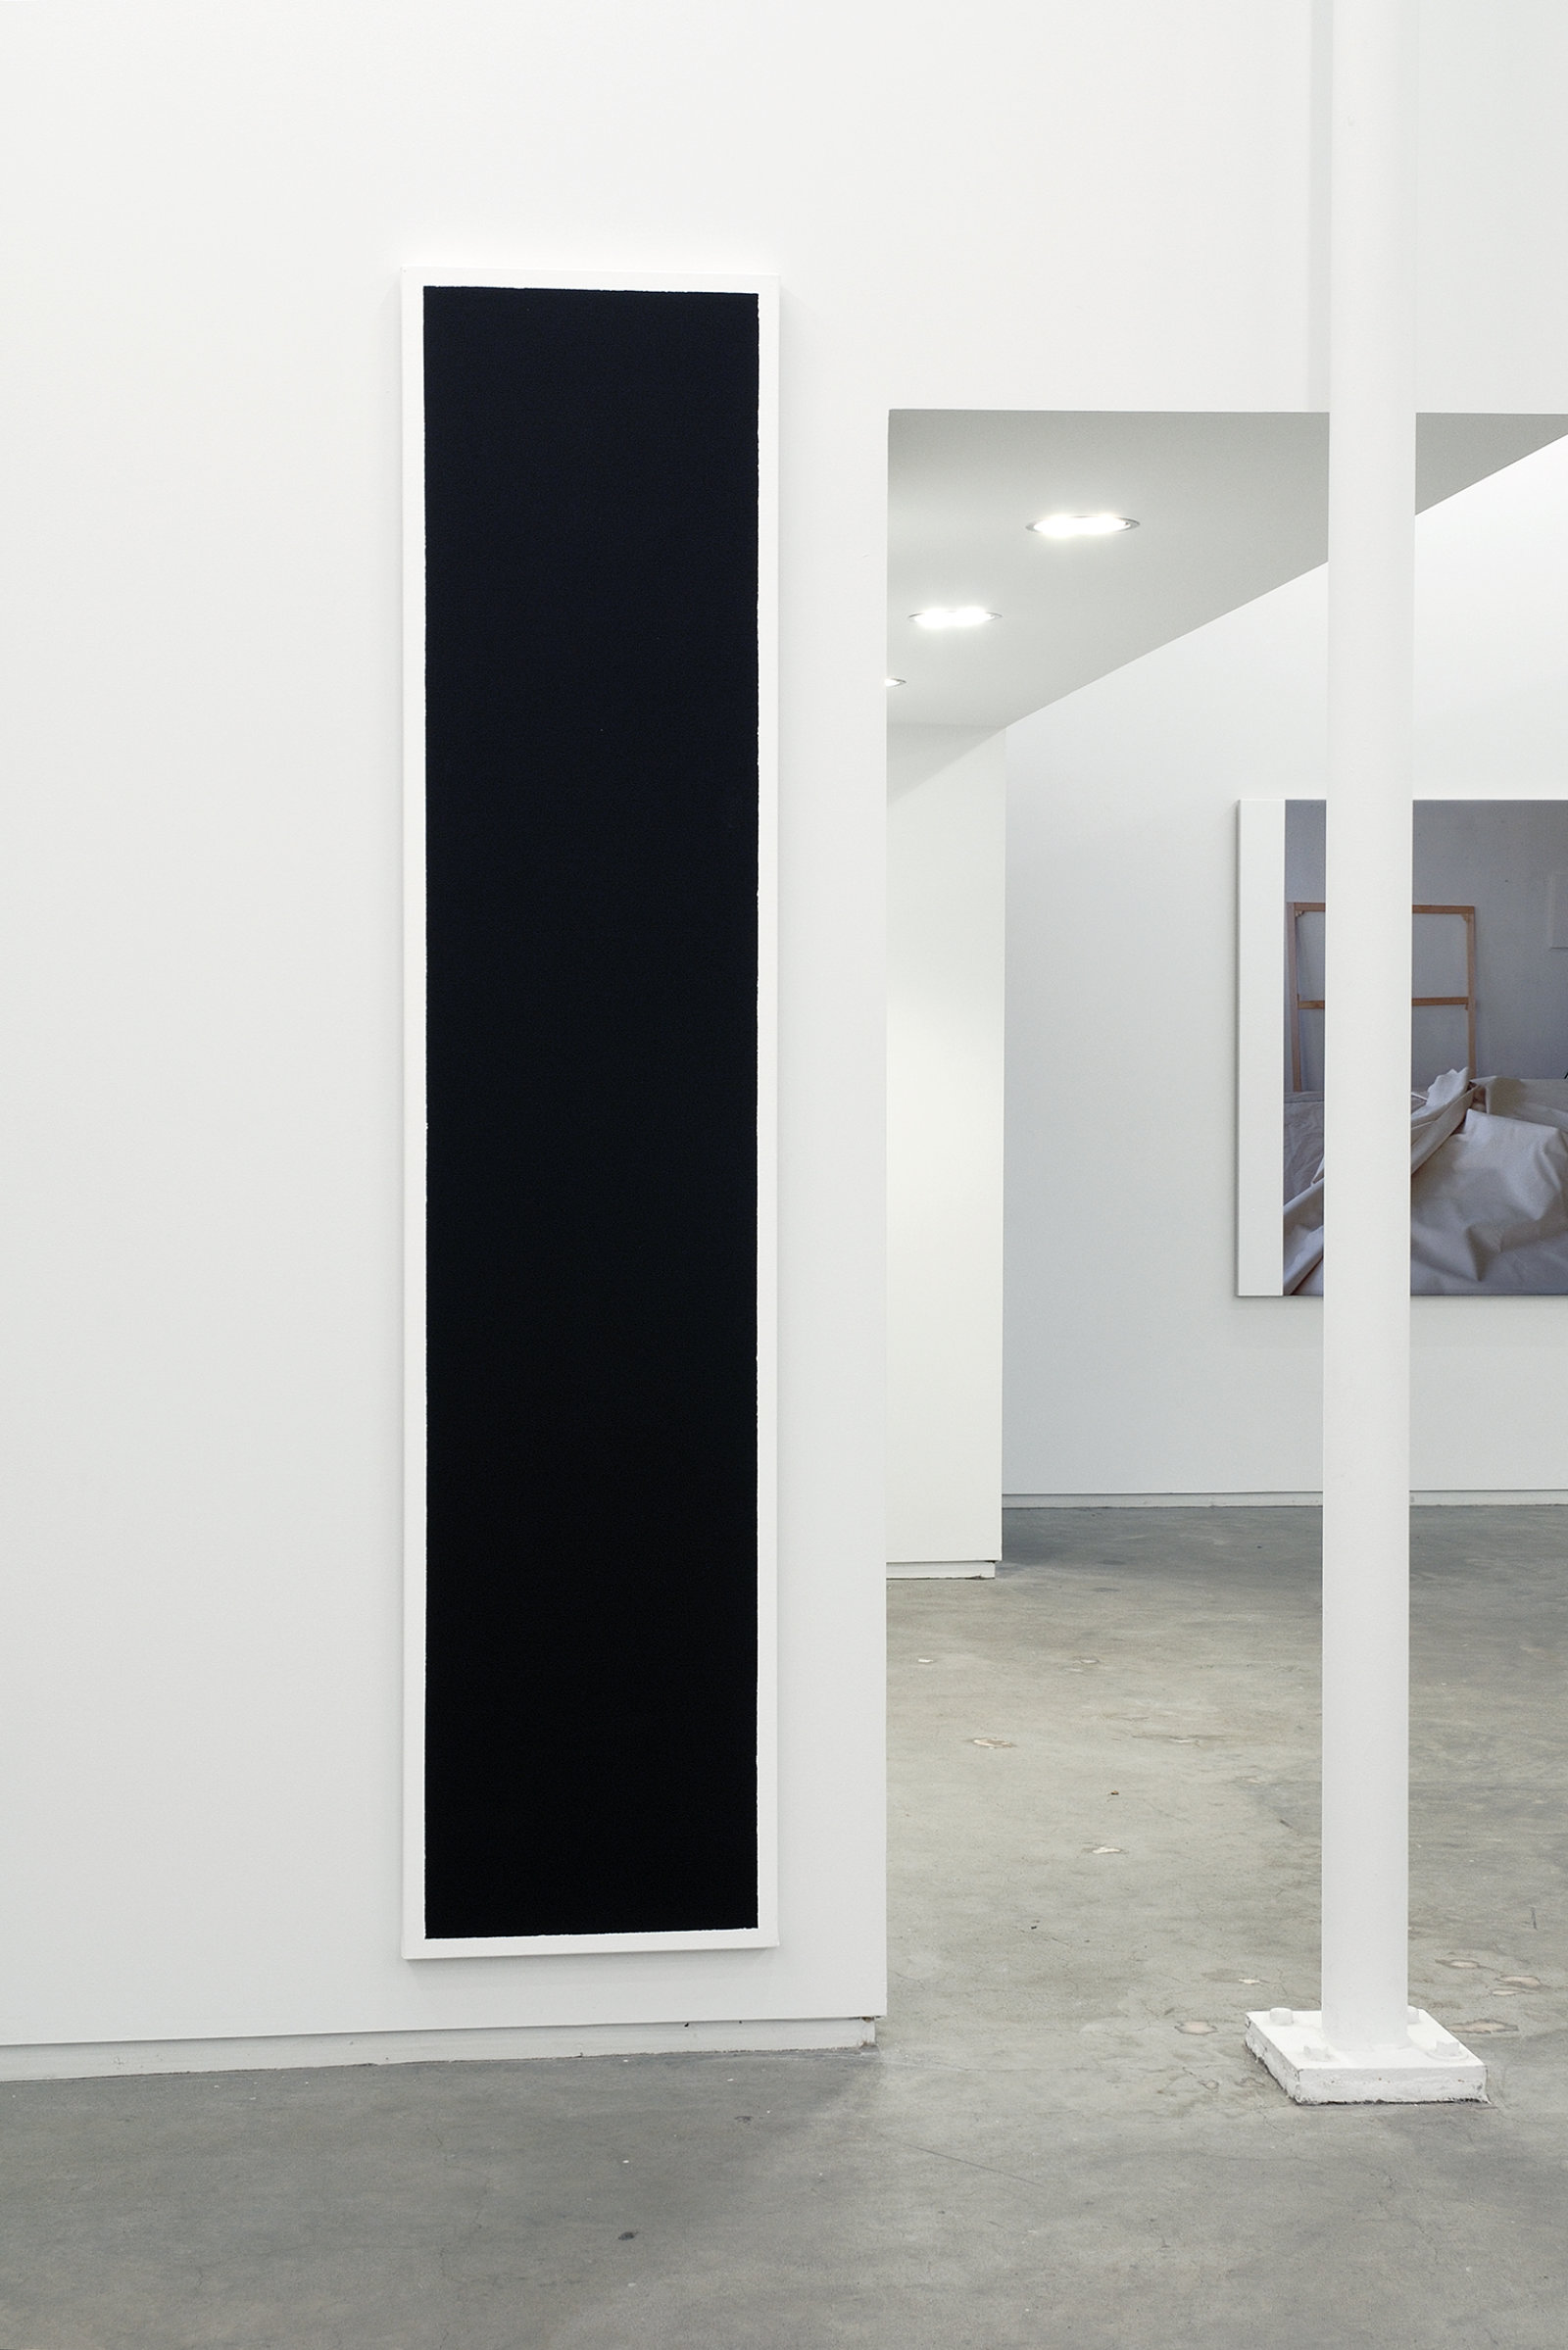 Ian Wallace, Untitled (Black Monochrome with White), 1967–2007, acrylic on canvas, 90 x 20 in. (229 x 51 cm)